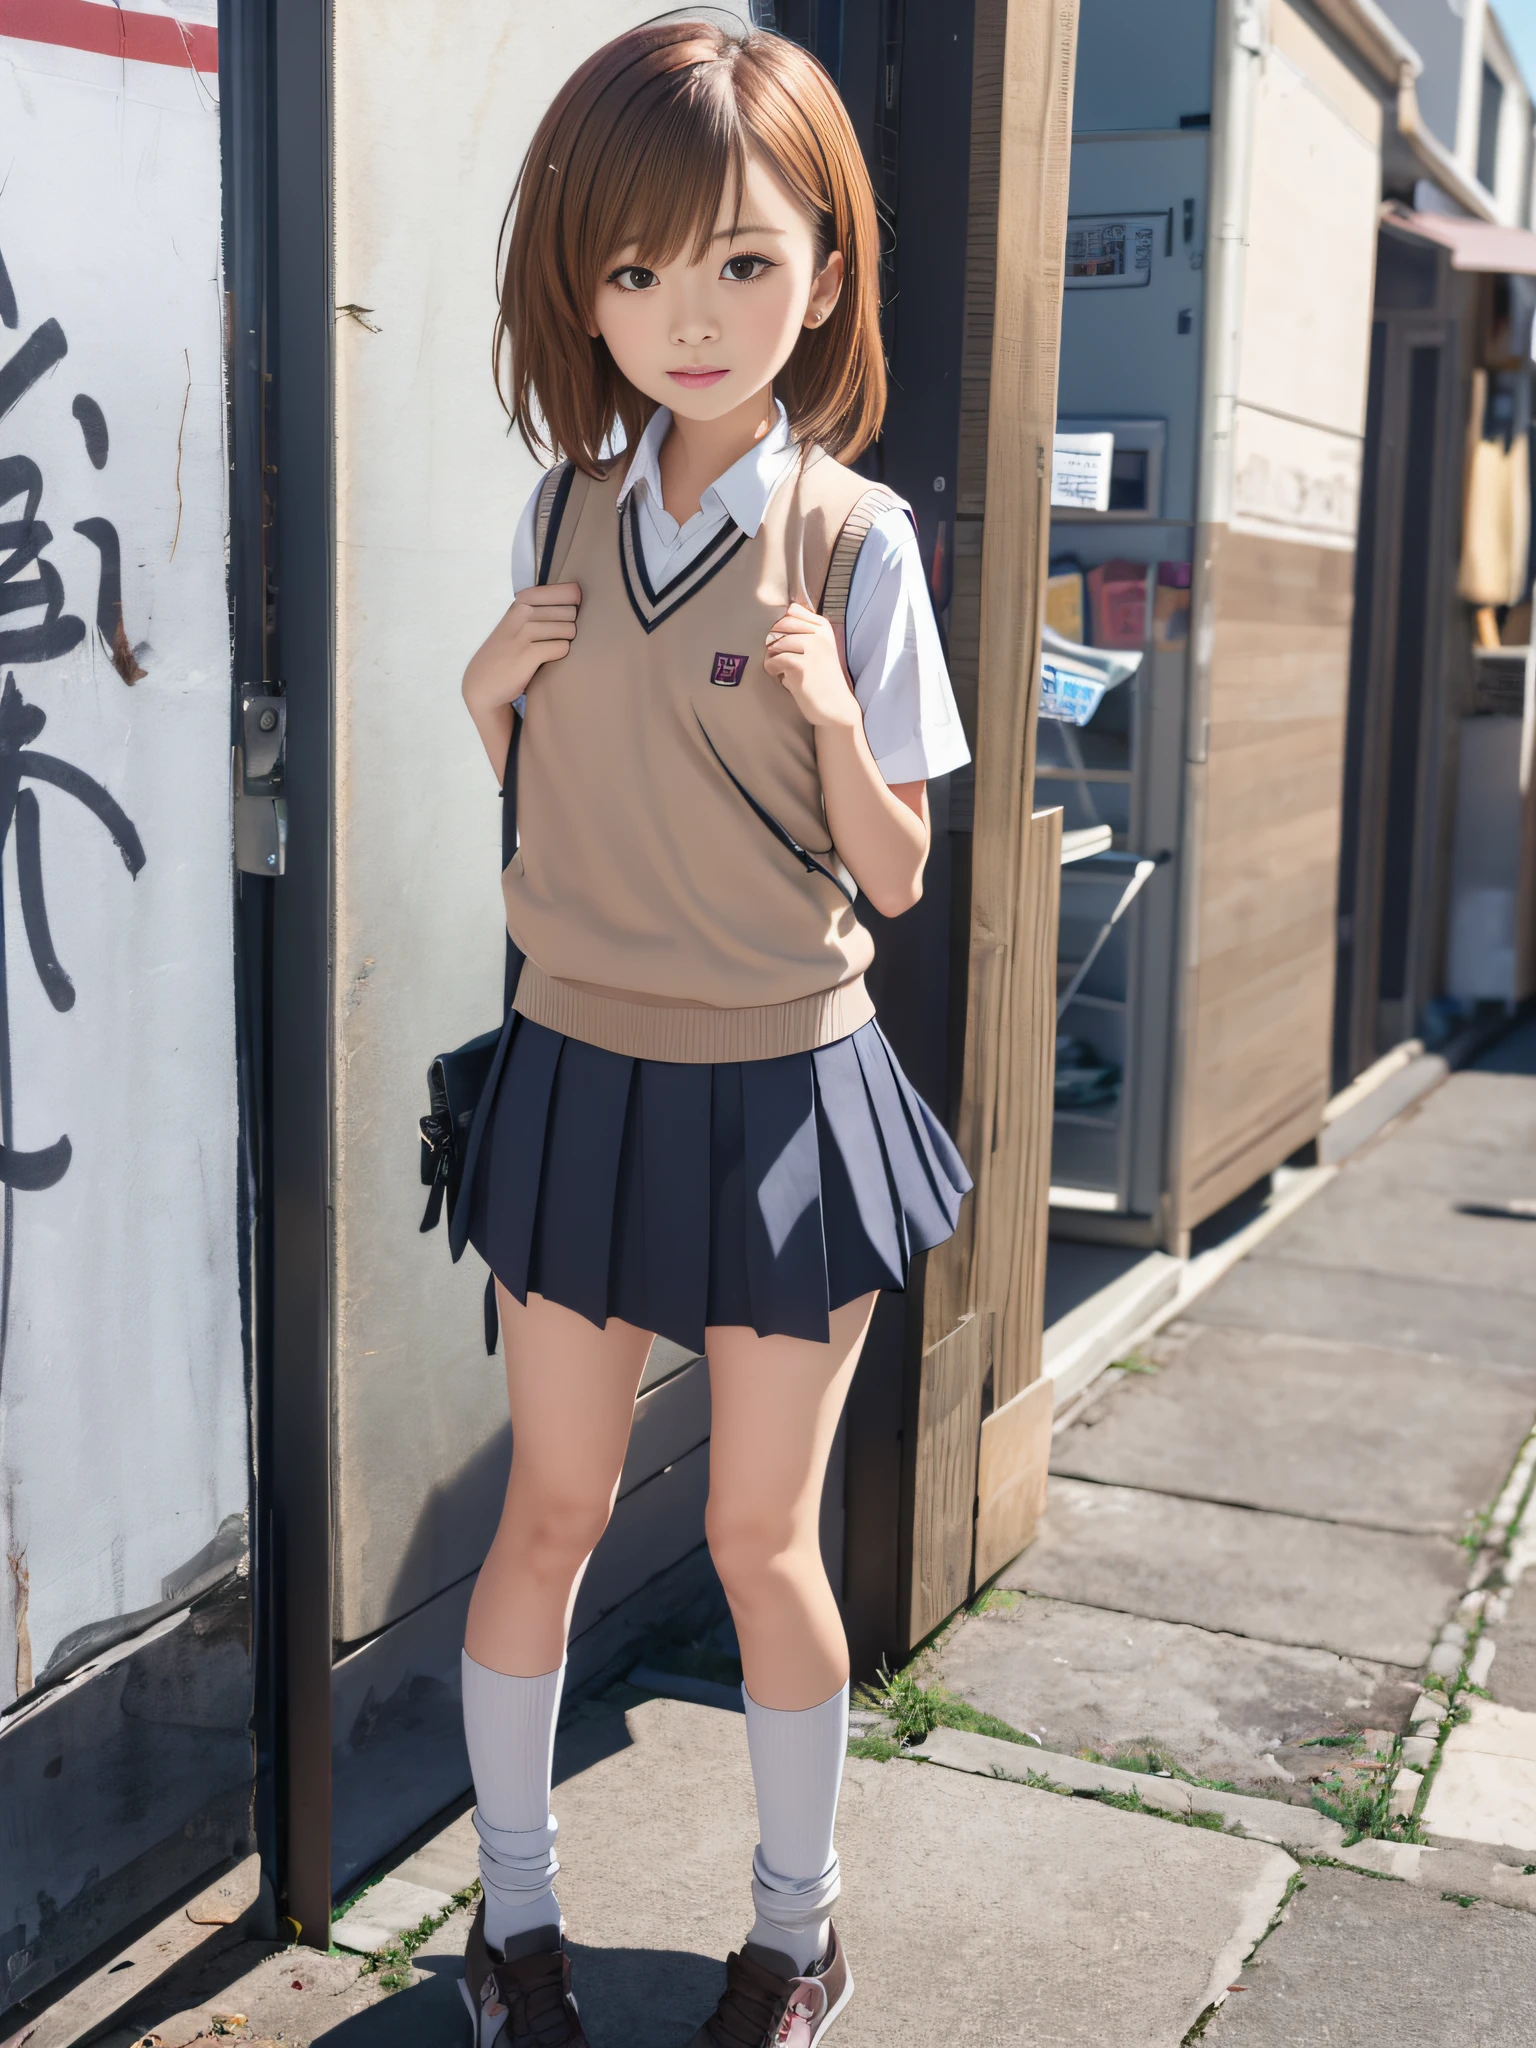 RAW image quality, ​masterpiece, top-quality, Misaka_mikoto, Brown-eyed, Short_hair, Small_Breast, looking at the viewers　student clothes, tokiwadai_School_uniform, whiteshirt, Sweater Vest, Gray plain mini skirt, , White loose socks, shoes, is standing